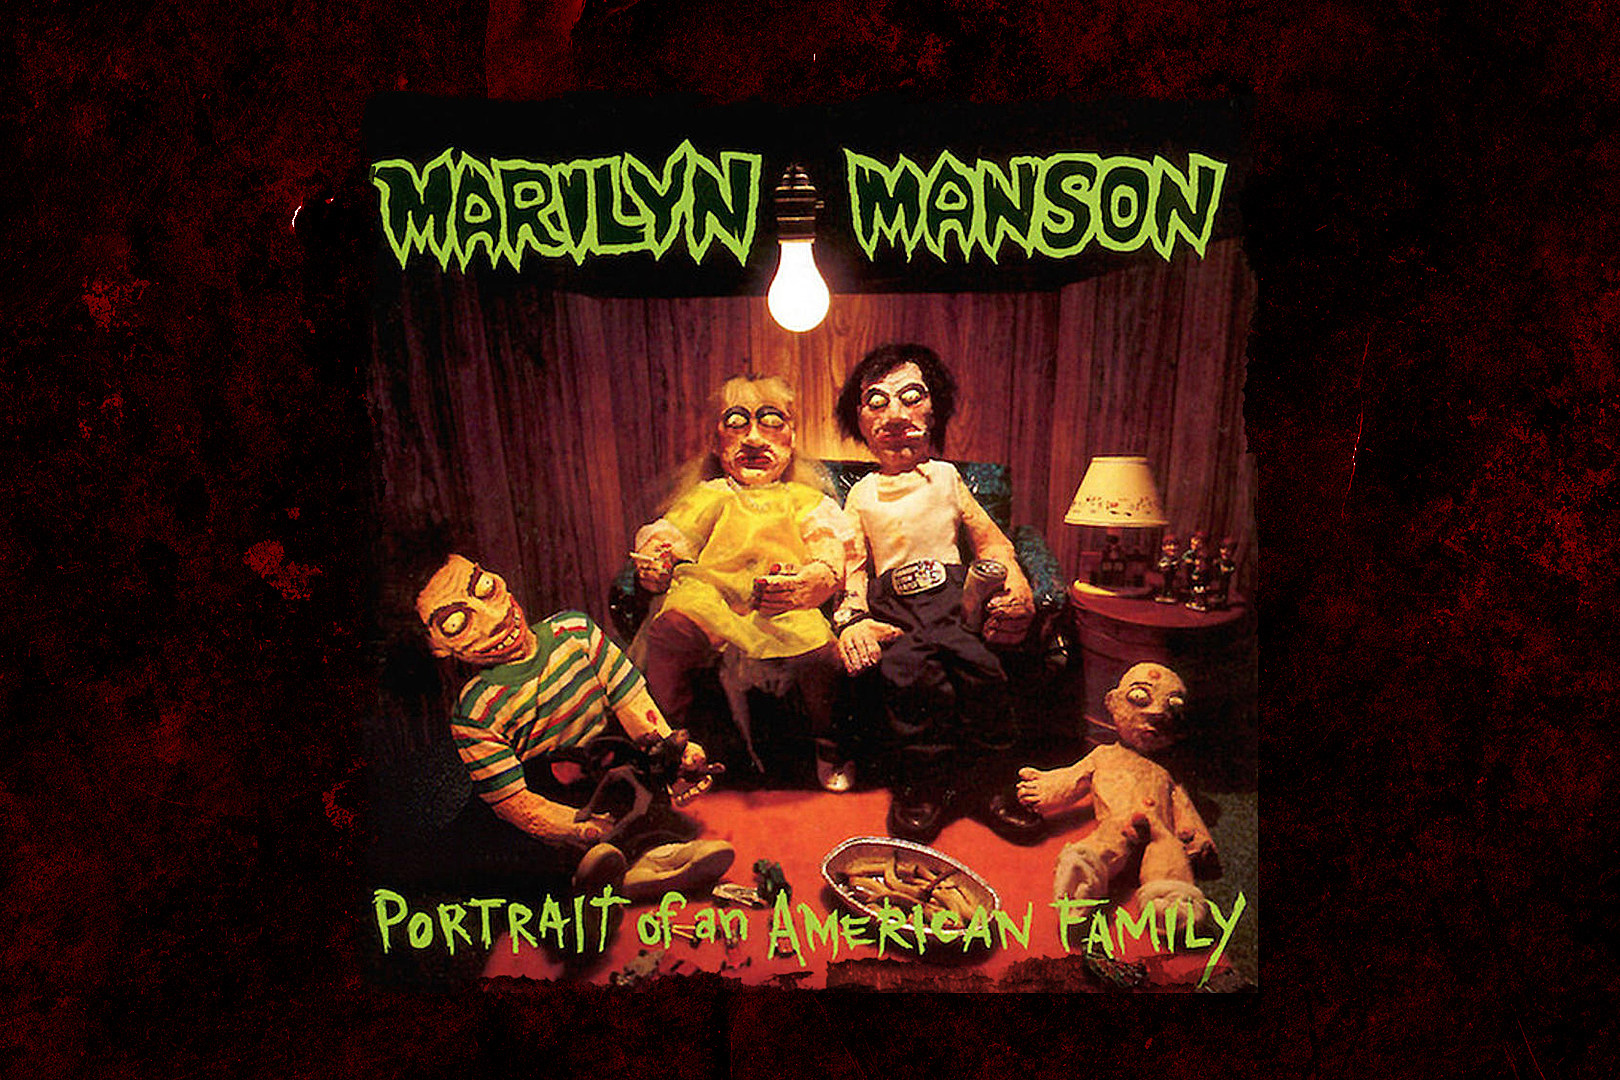 The album cover for Marilyn Manson’s Portrait of an American family.